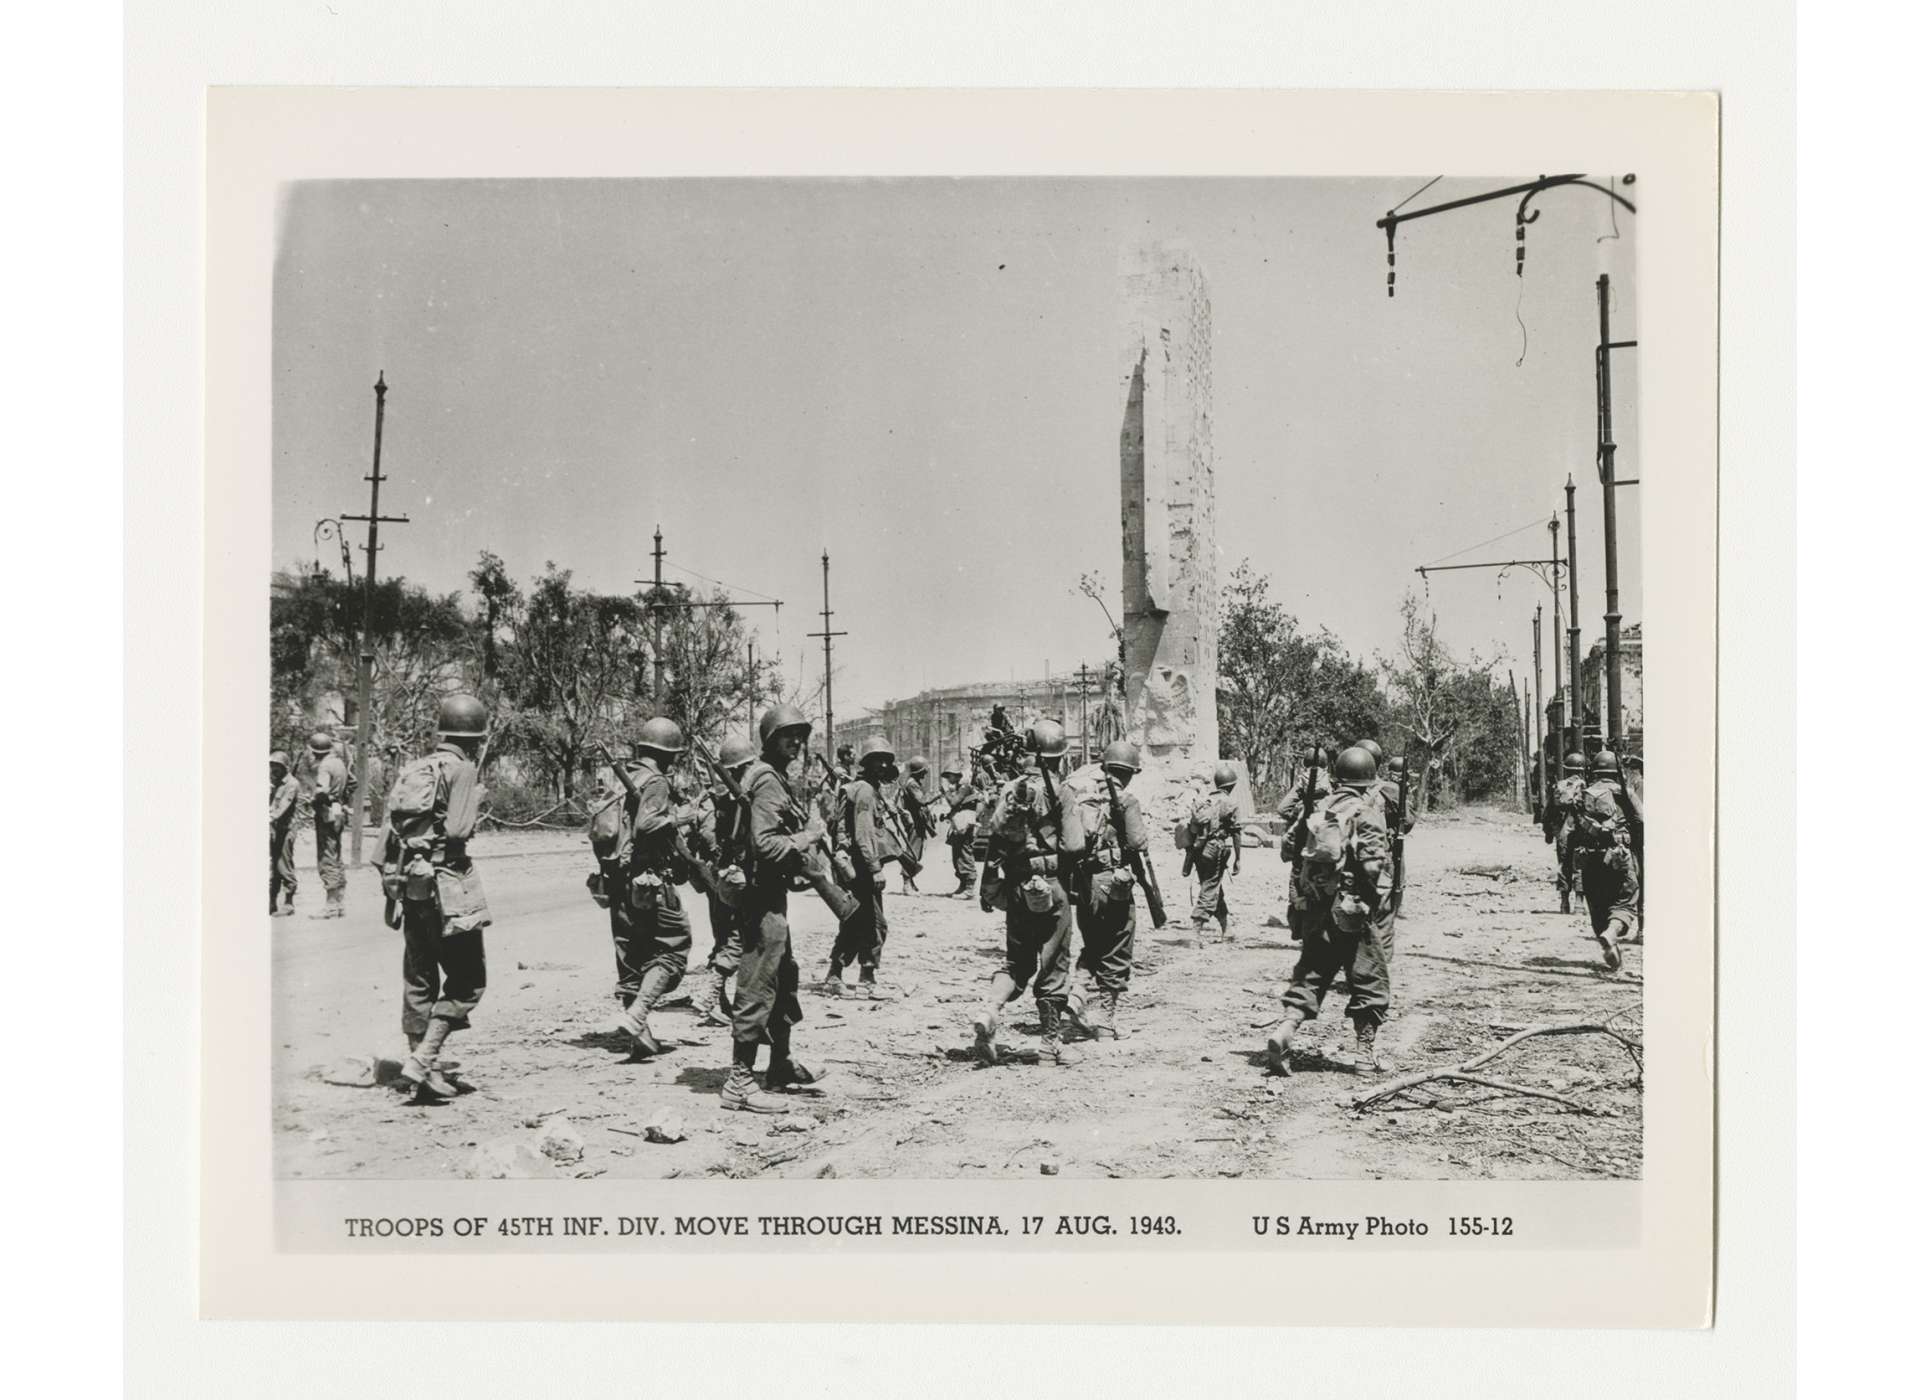 Members of the US 45th Infantry Division walking through wartorn Messina, August 17, 1943. Gift in memory of Sgt. Lyle E. Ebersprecher, from the Collection of The National WWII Museum, 2013.495.970.